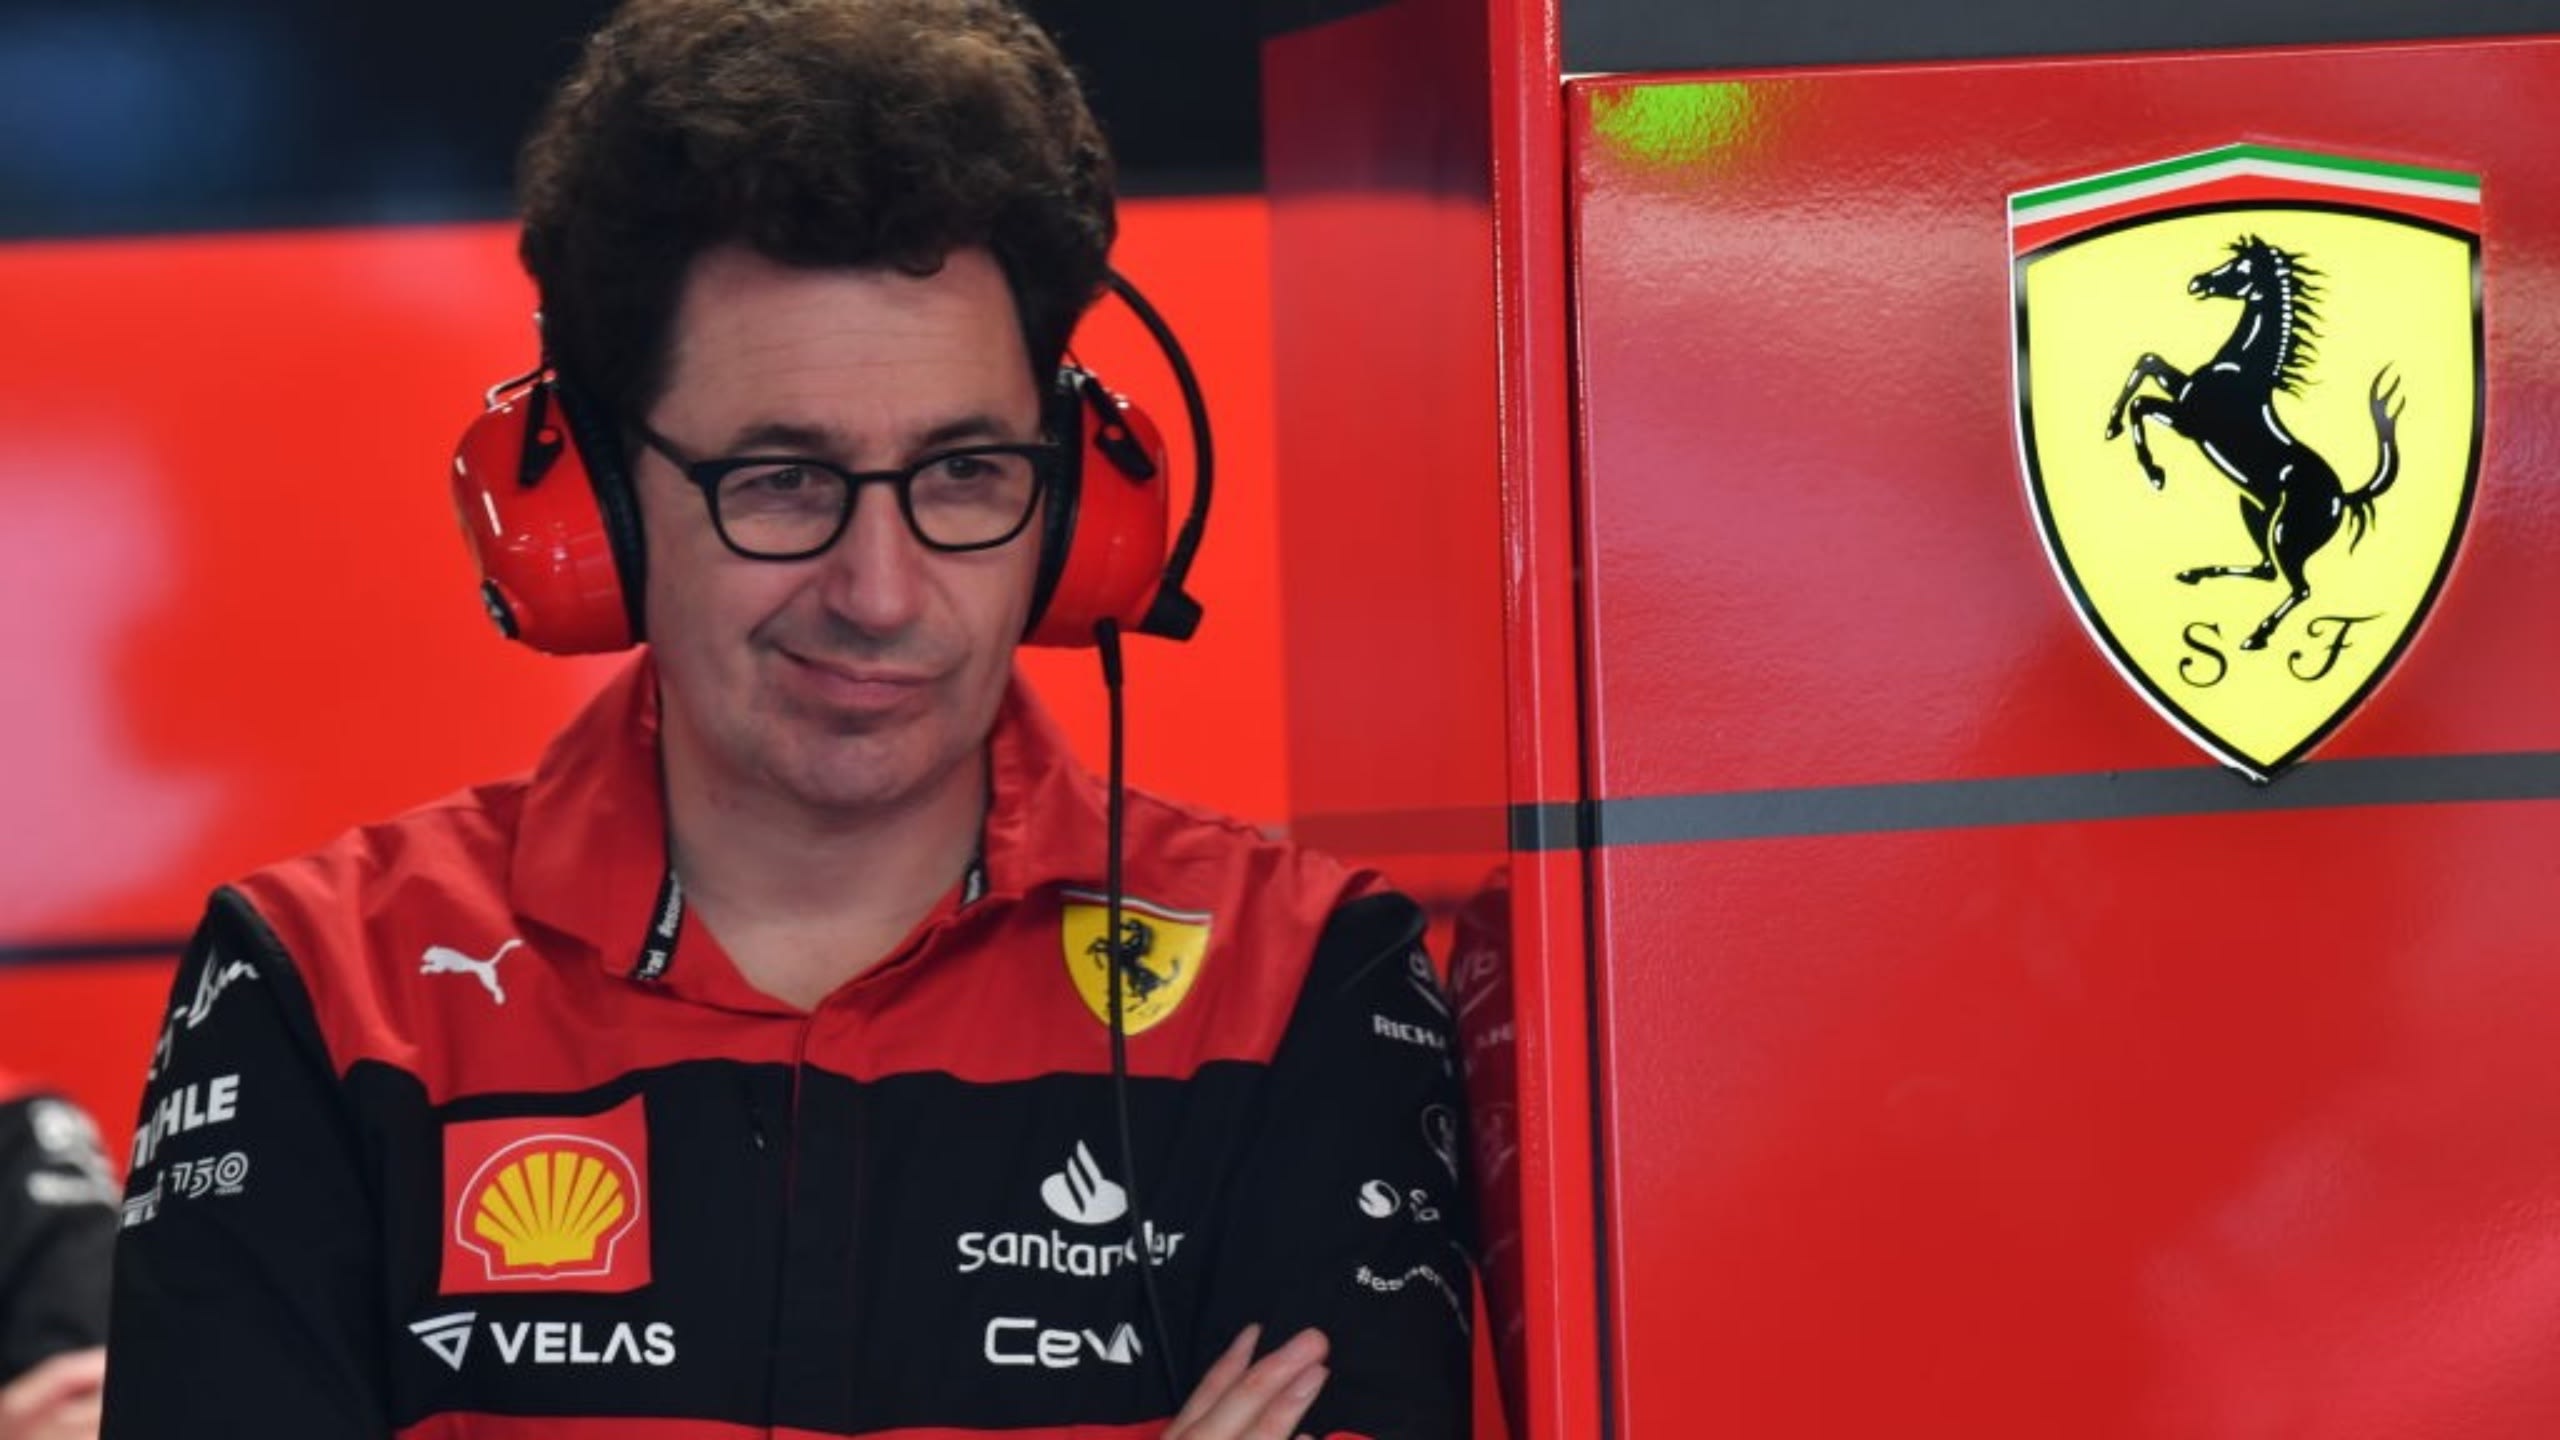 MONTREAL, QUEBEC - JUNE 17: Mattia Binotto, Team Principal Scuderia Ferrari, Ferrari Chief Technical Officer seen during the F1 Grand Prix of Canada at Circuit Gilles Villeneuve on June 17, 2022 in Montreal, Quebec. (Photo by Paolo Pedicelli ATPImages/Getty Images)